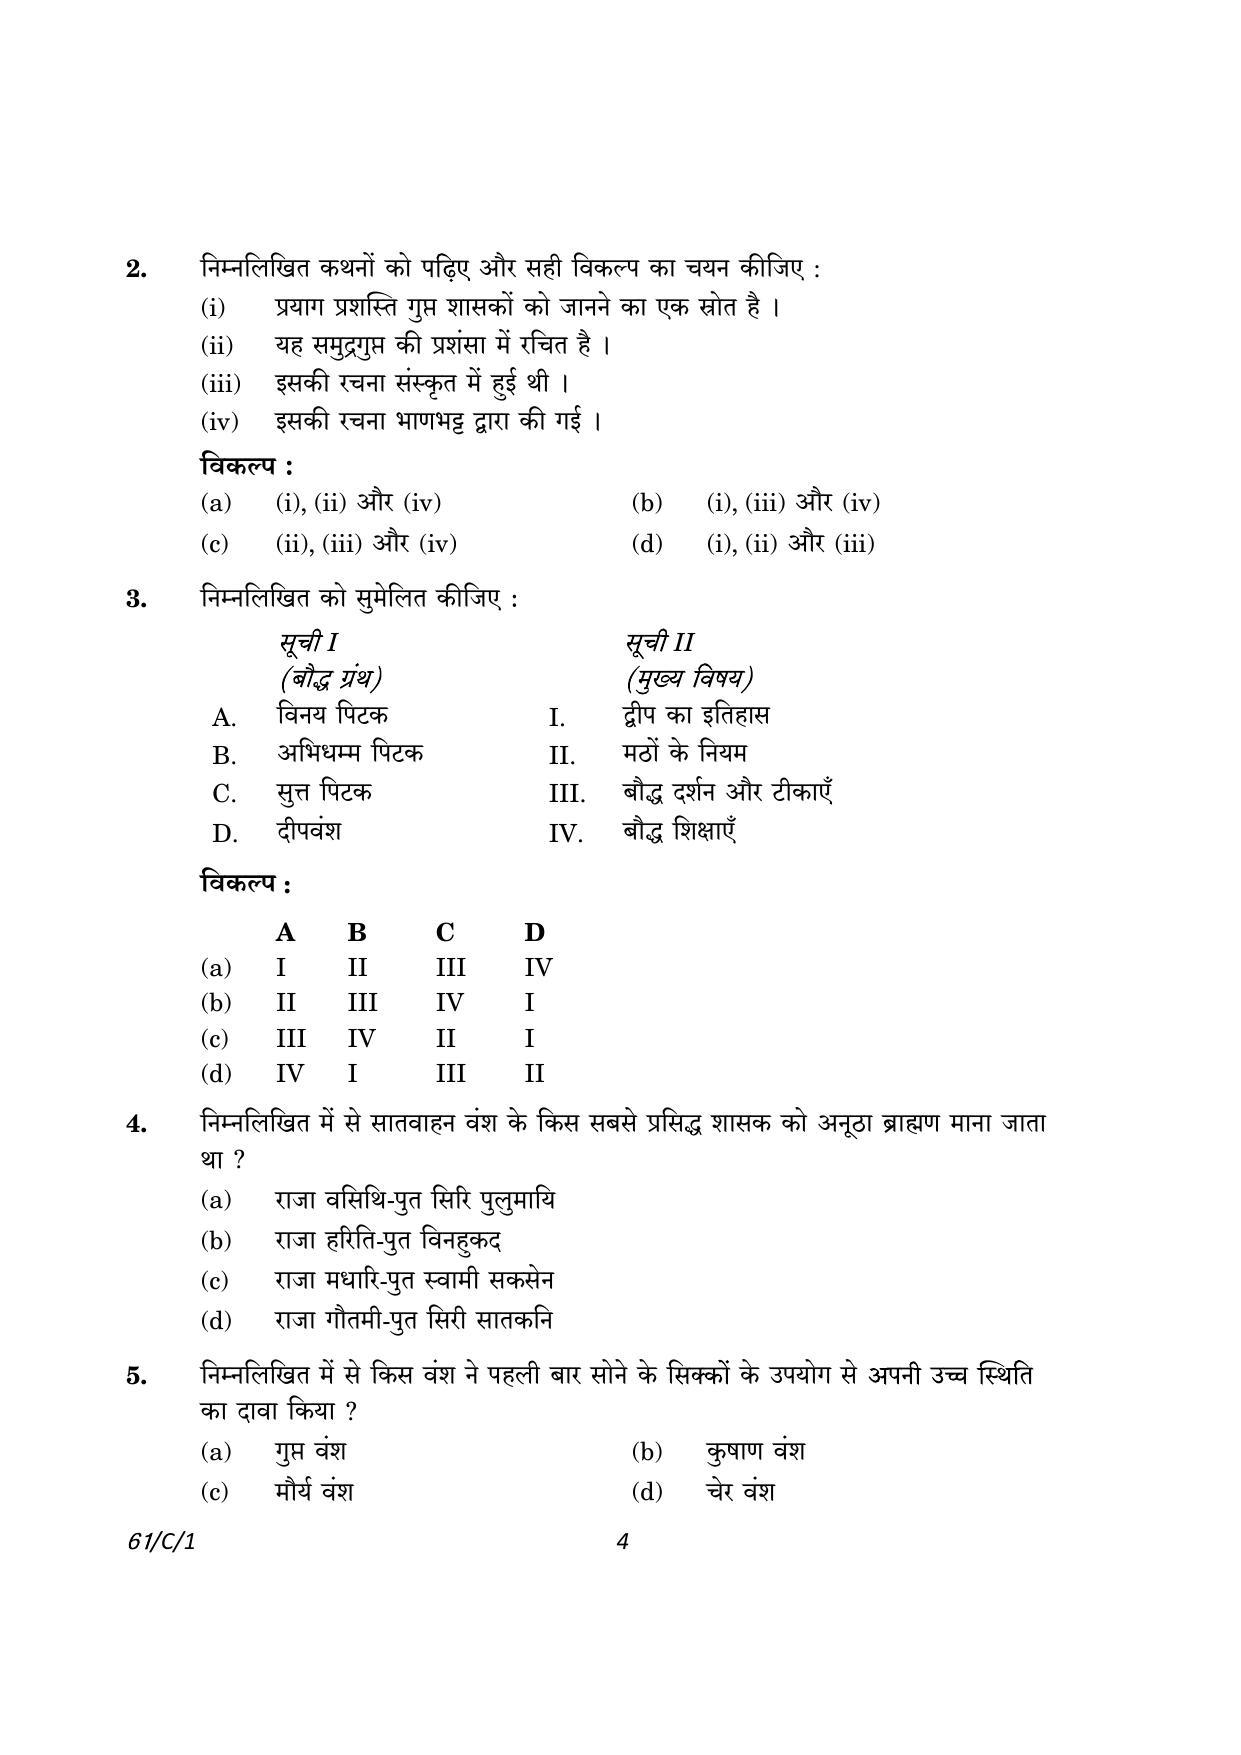 CBSE Class 12 61-1 History 2023 (Compartment) Question Paper - Page 4